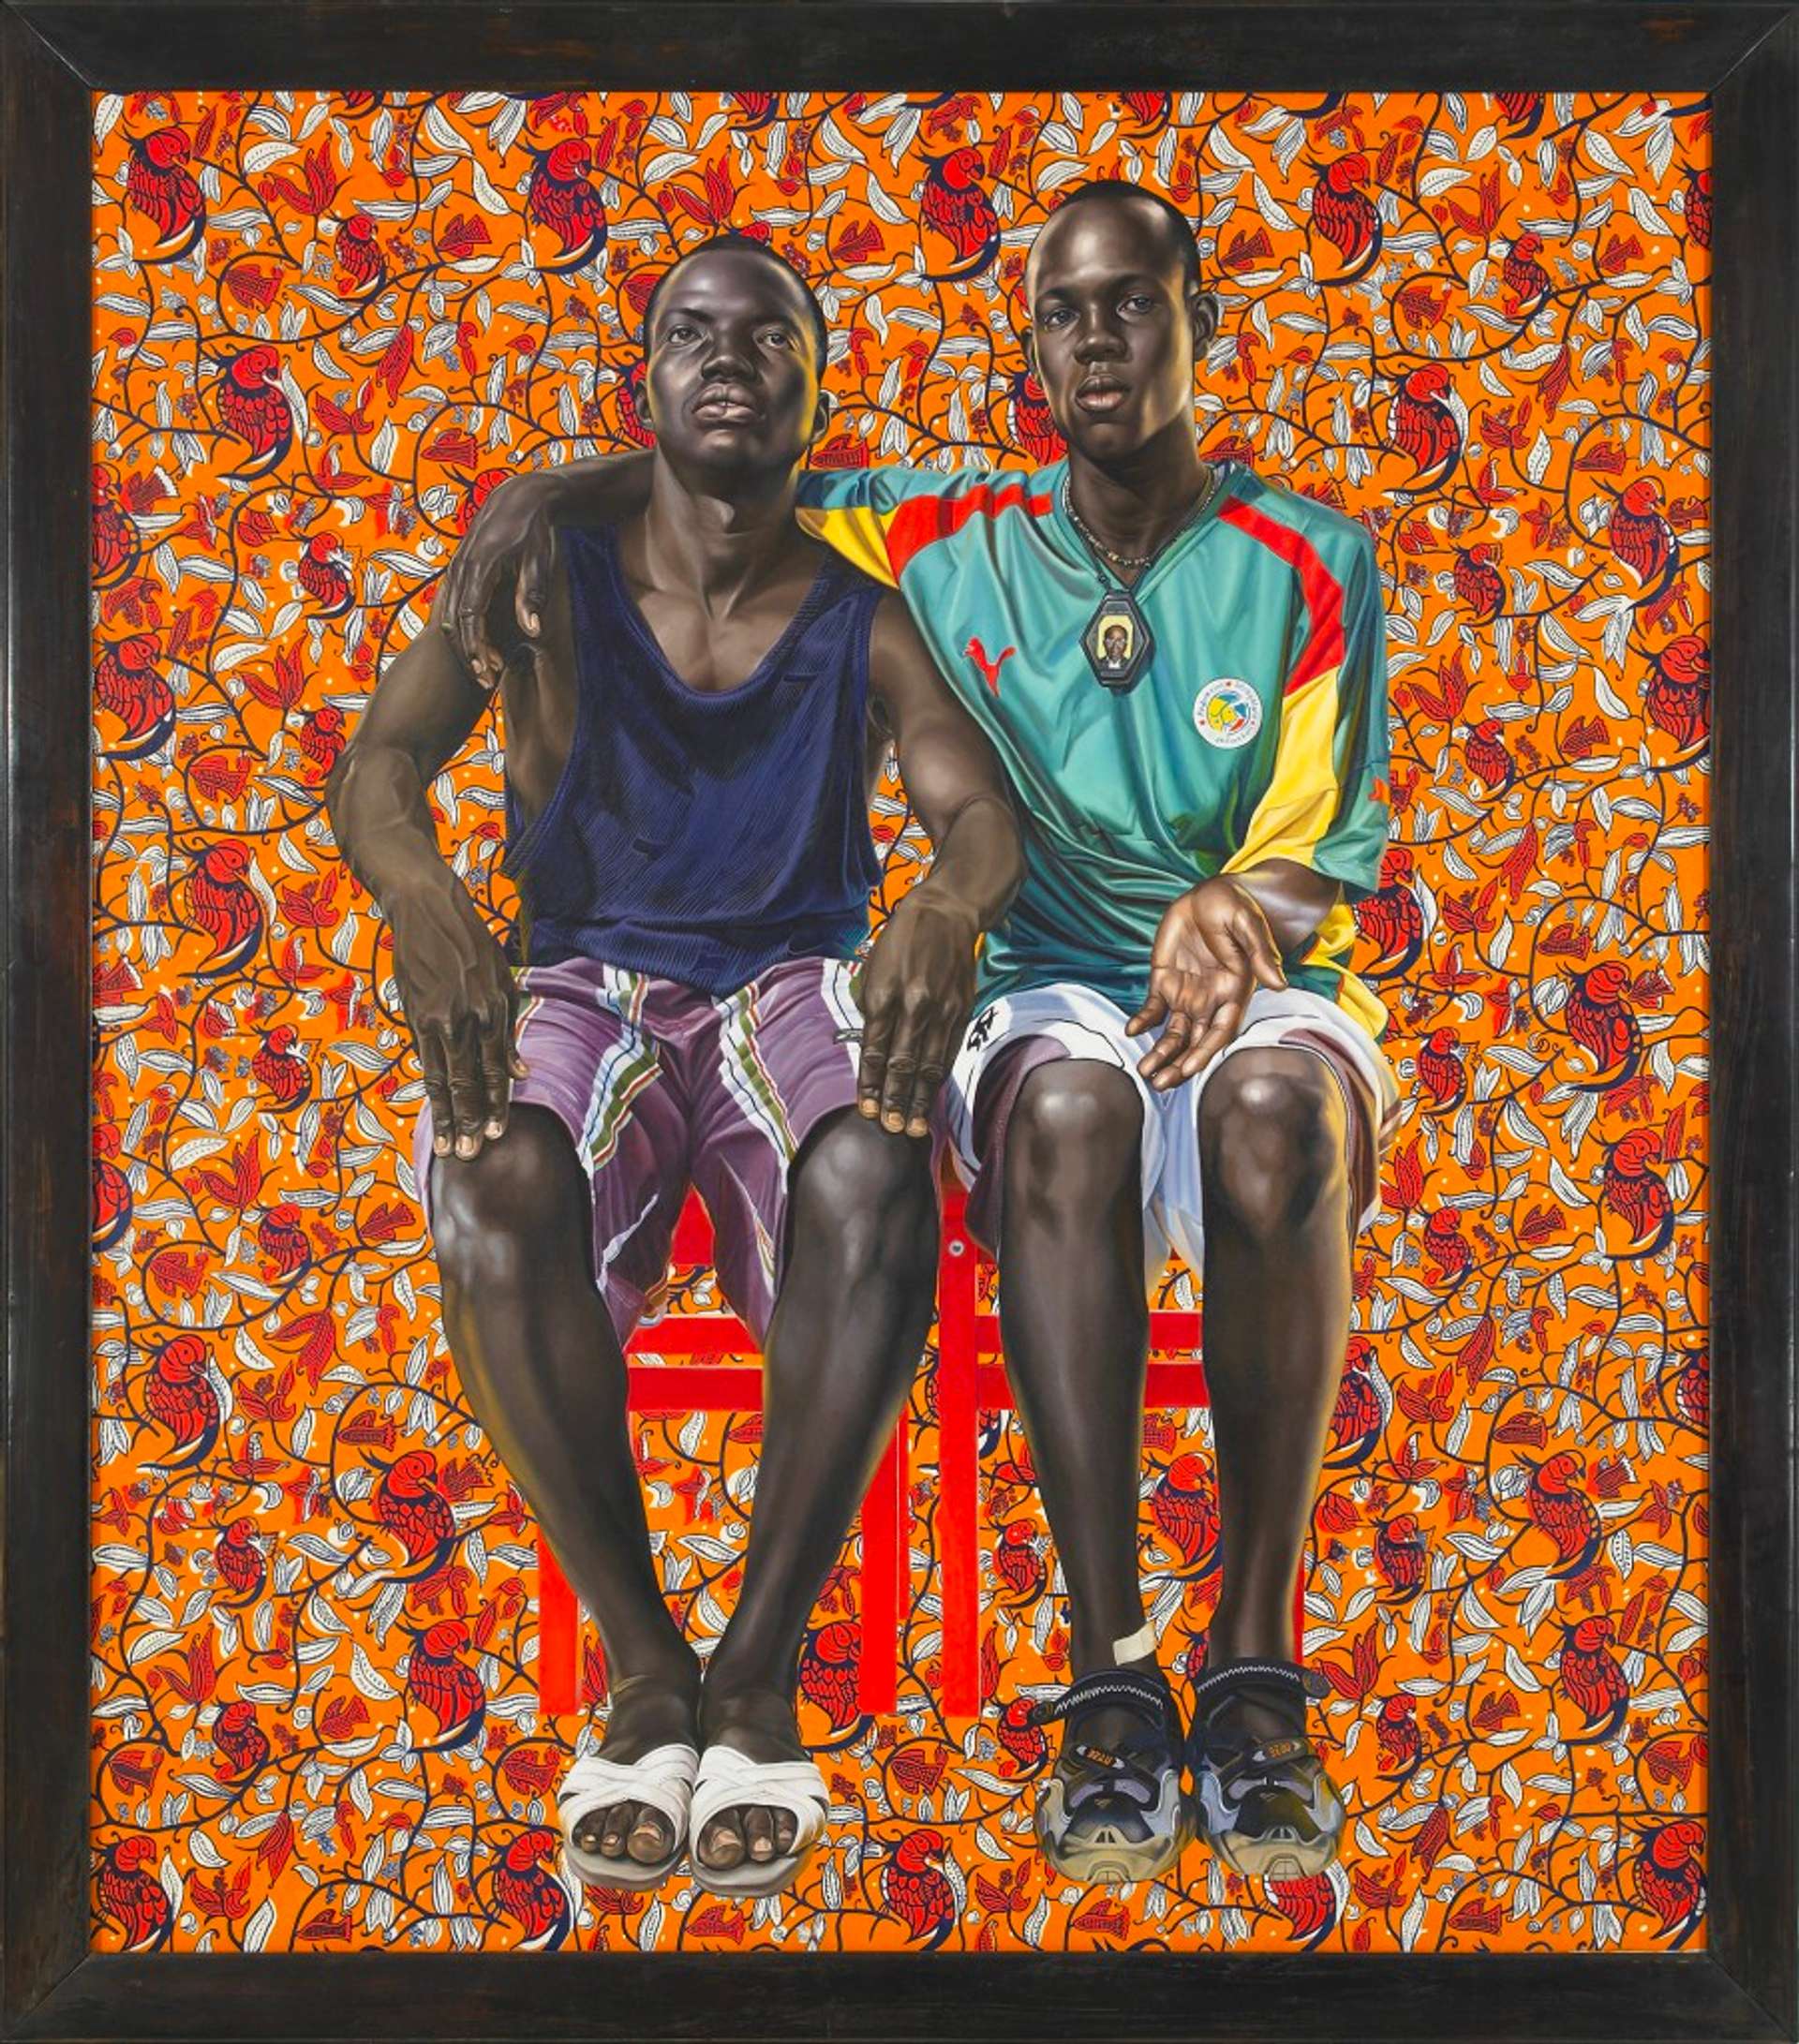 A Buyer's Guide To Kehinde Wiley